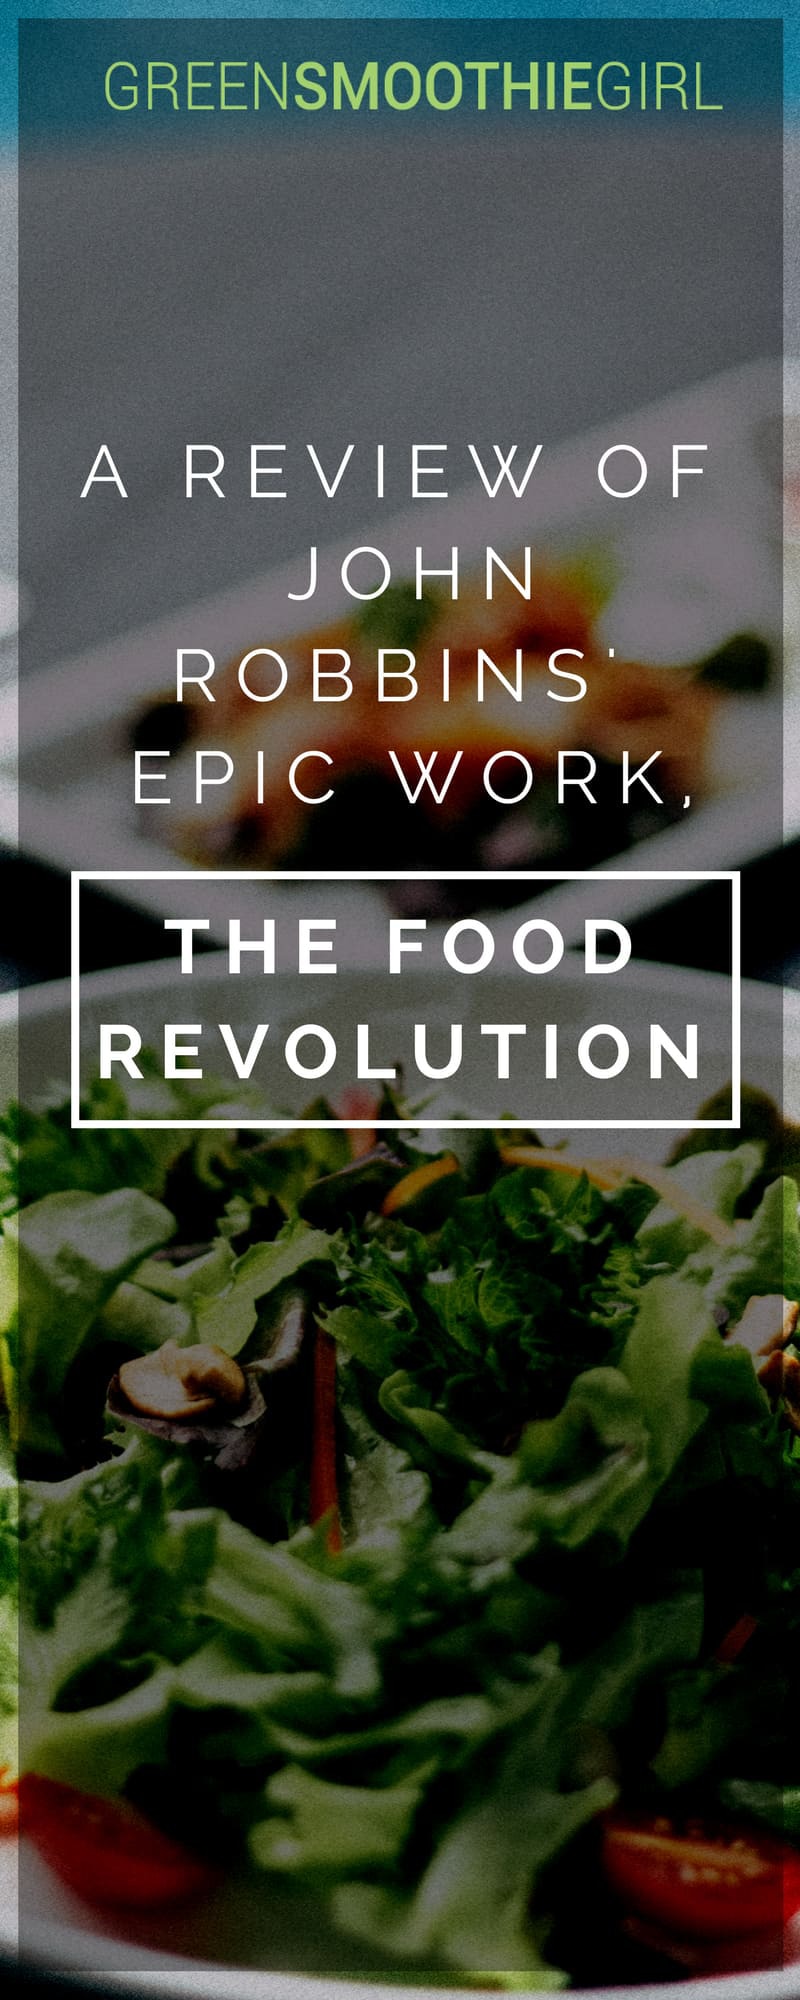 Placard | A Review Of John Robbins’ Epic Work, The Food Revolution